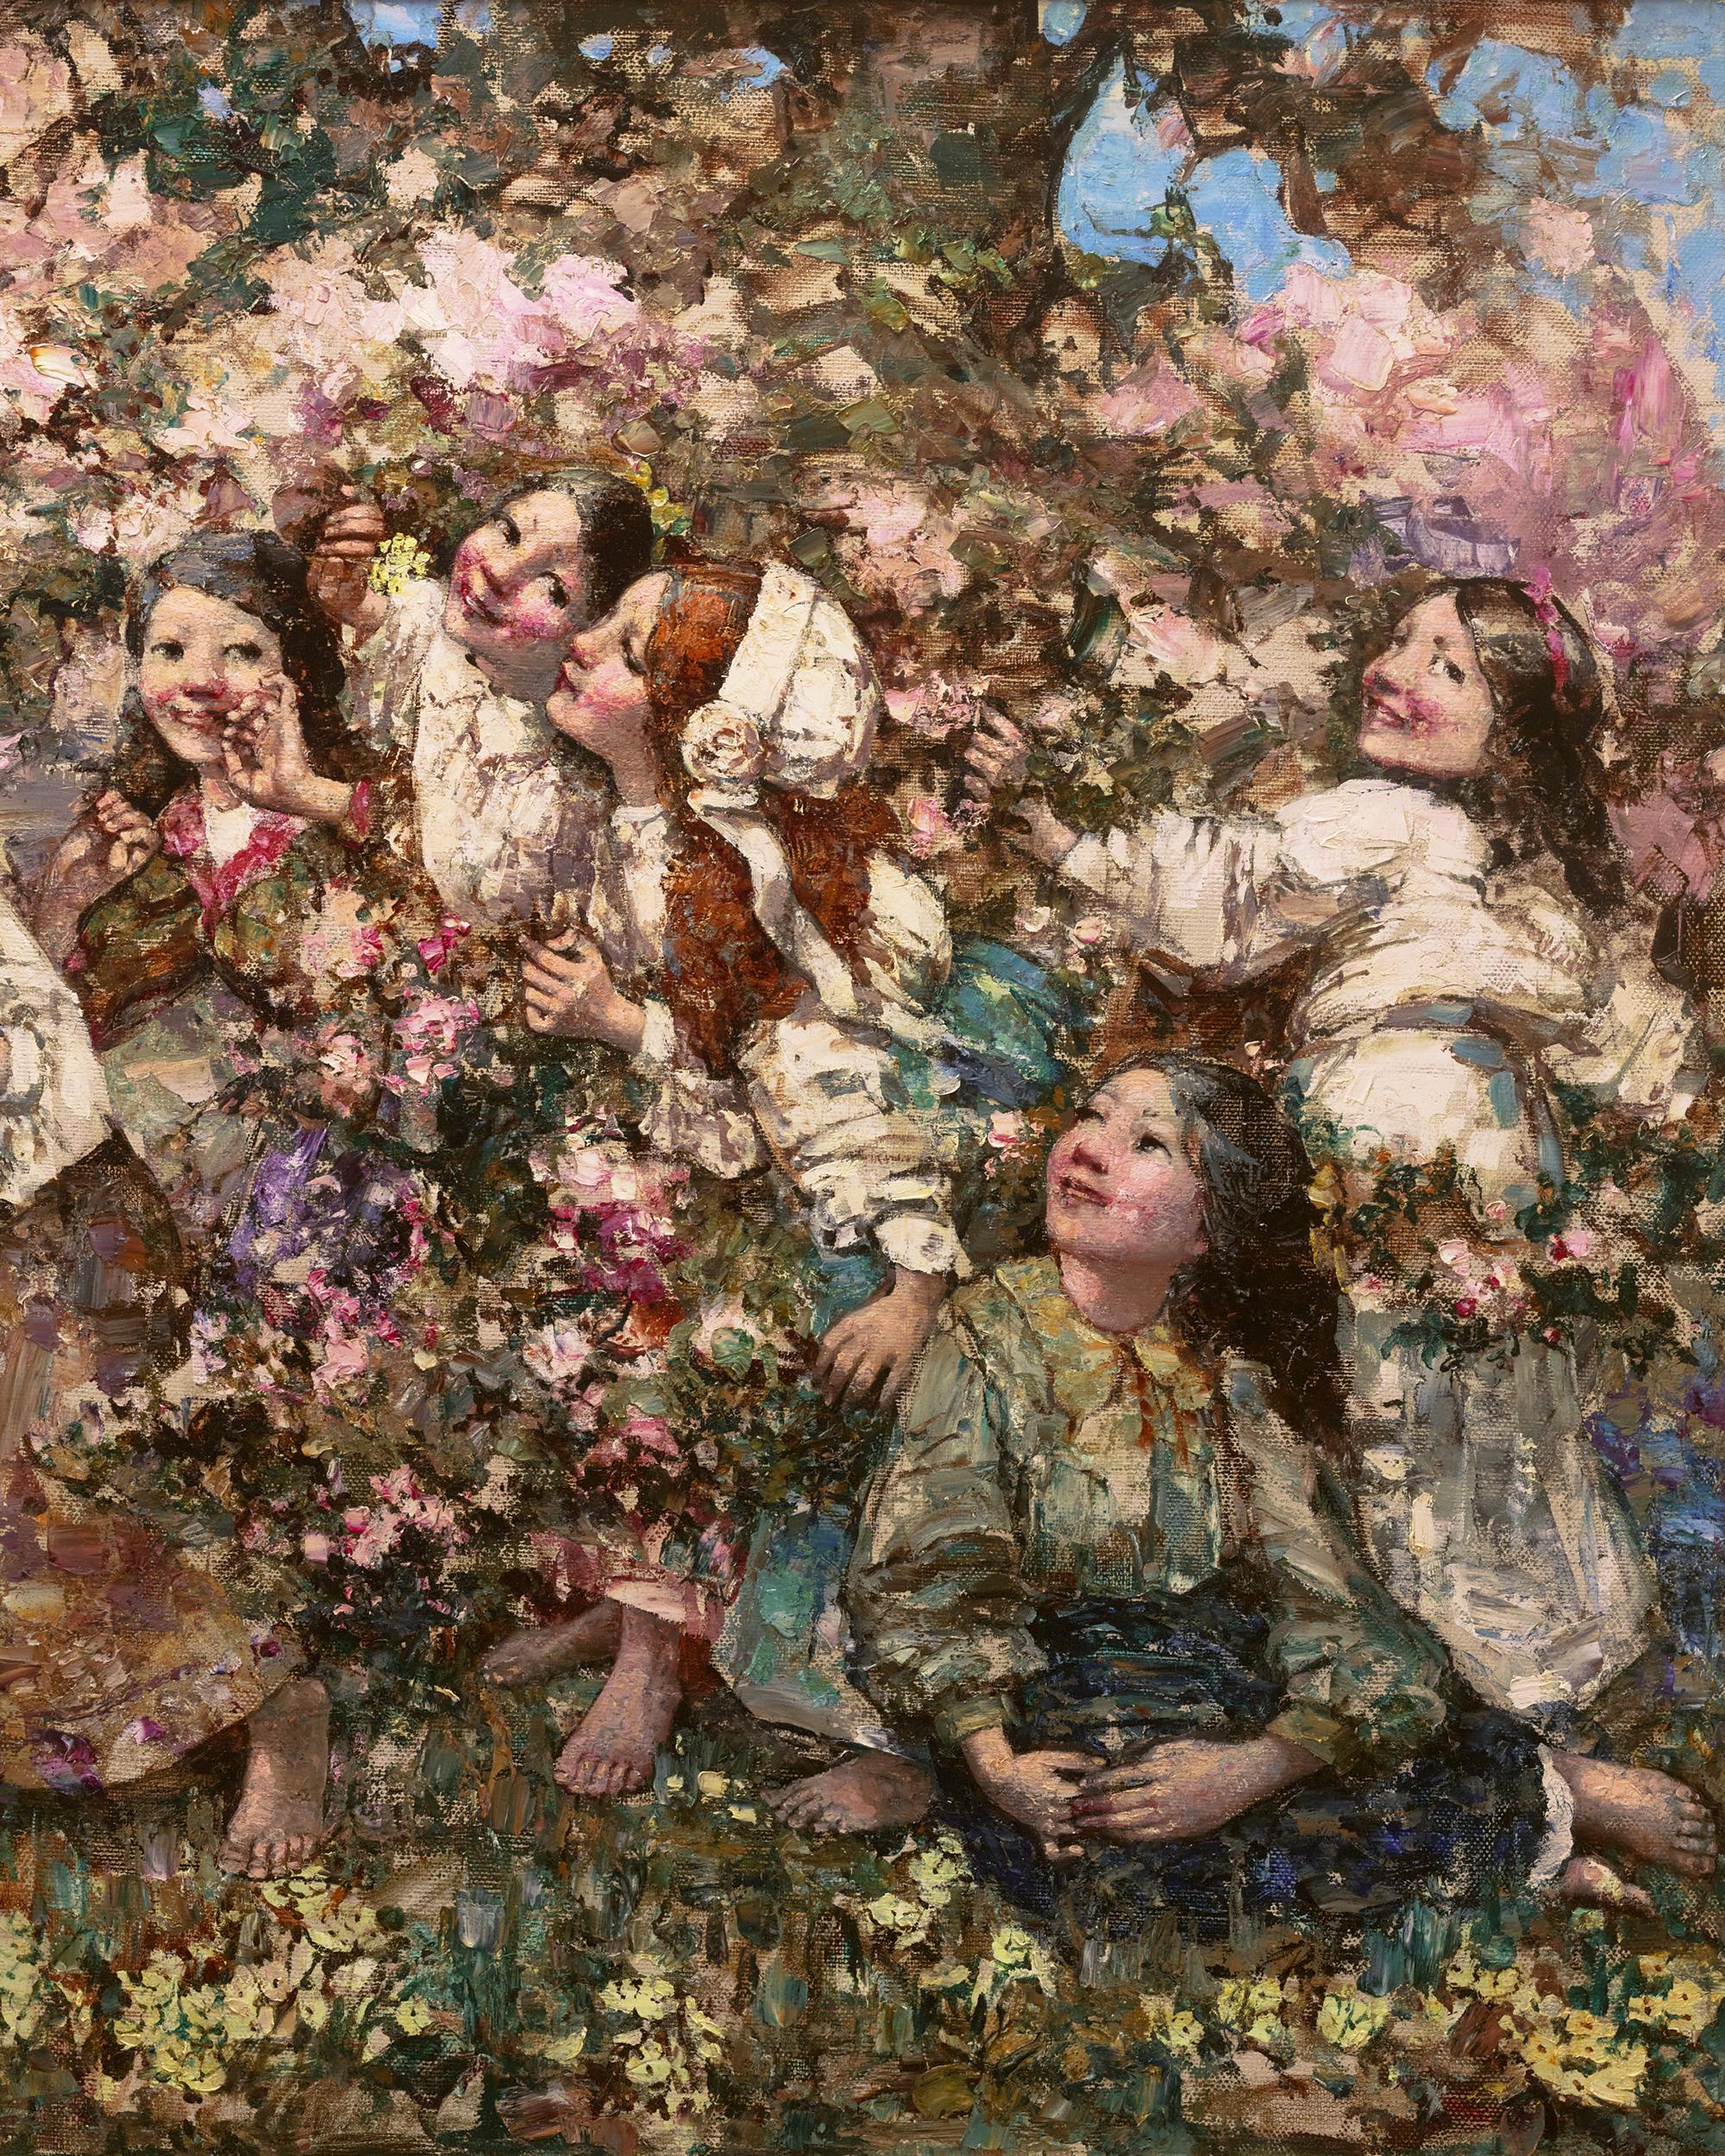 Edward Atkinson Hornel
1864-1933  Scottish

A Spring Roundelay

Signed “E A Hornel” and dated 1910 (lower left)
Oil on canvas

Visually arresting with the vivid hues of springtime, this uplifting scene of seven young girls romping in a springtime